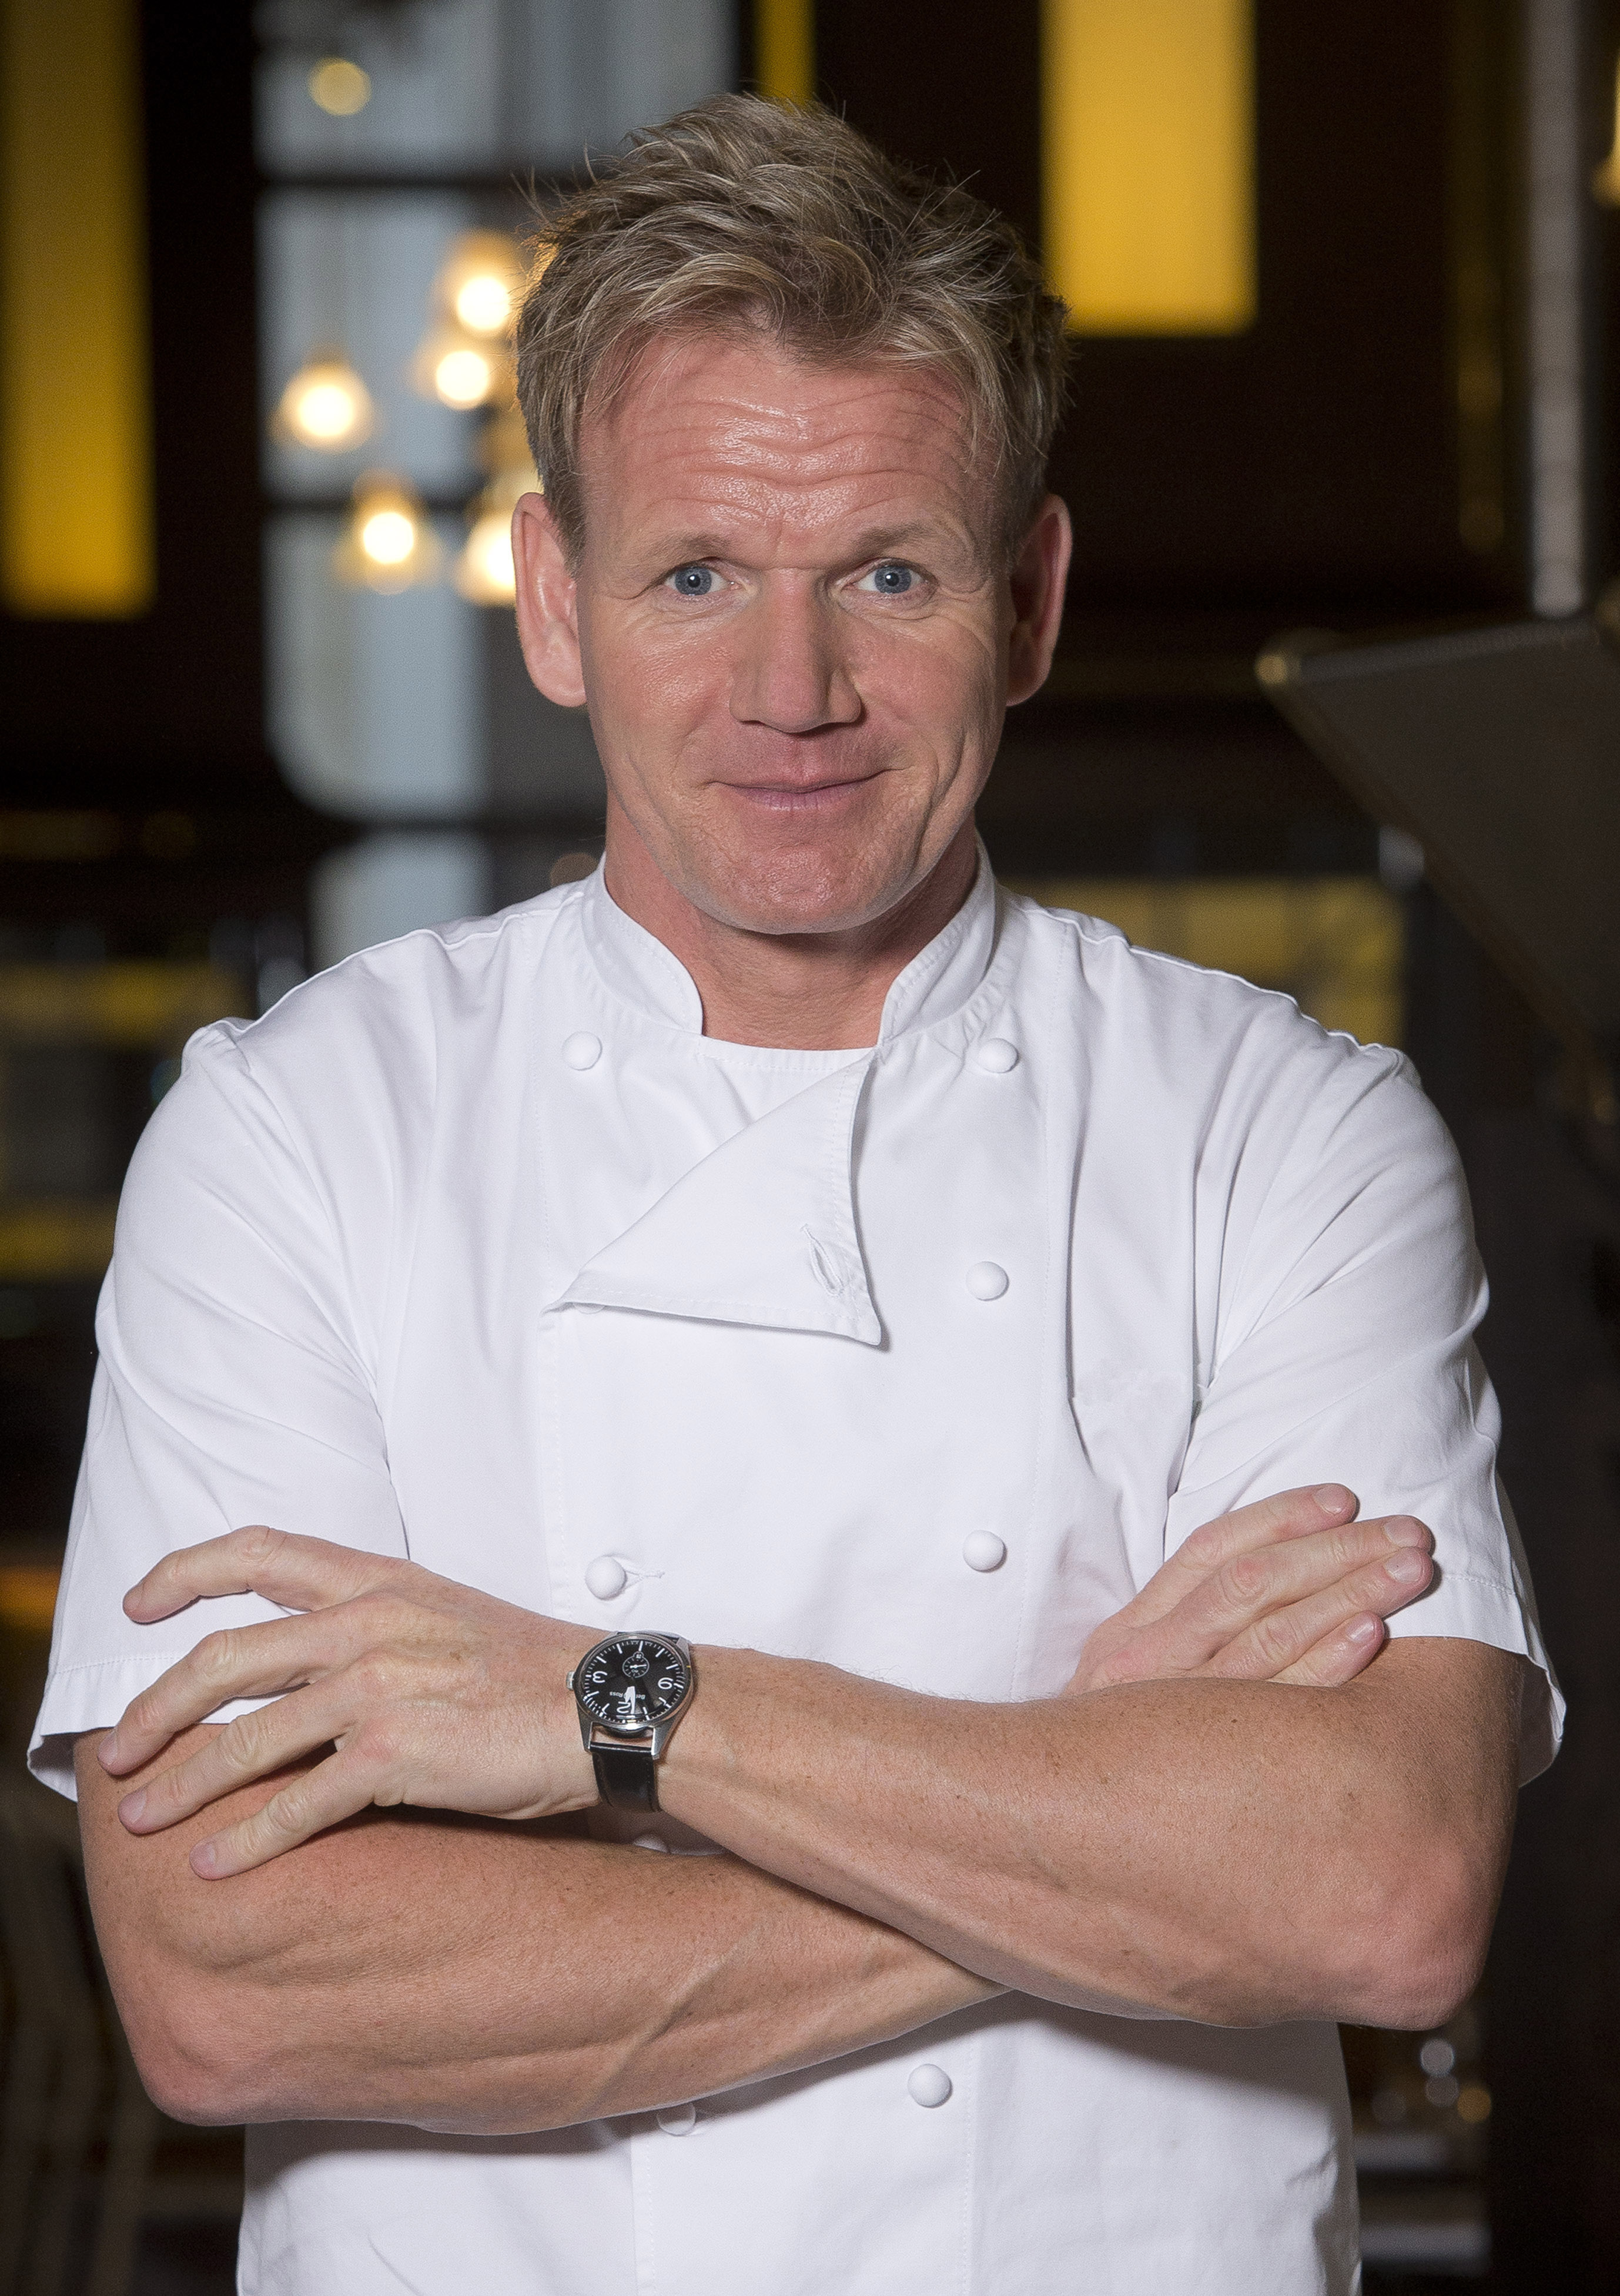 30 Unknown Facts About The World Famous Celebrity Chef – Gordon Ramsay